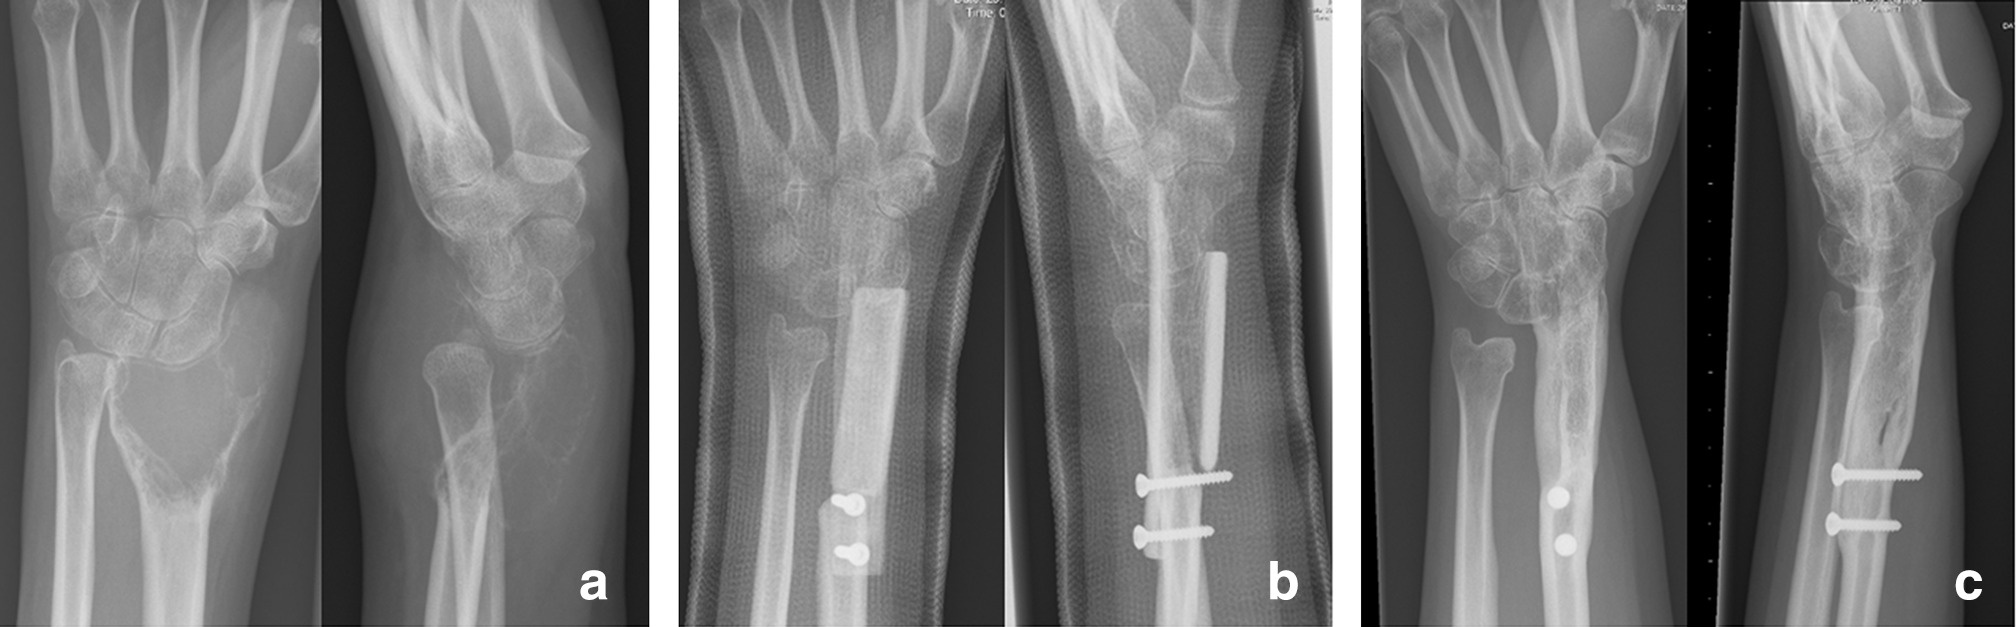 Fig. 2 
          a) 32-year-old patient with high-risk giant cell tumour of of the distal radius with cortical thinning, soft-tissue extension, and disturbed radiocarpal alignment. b) En bloc resection was performed with arthrodesis with a tibia strut autograft and screw fixation. c) Radiographs at five-year follow-up show complete fusion of both radiocarpal arthrodesis and proximal bone junction, with remodelling of the graft.
        